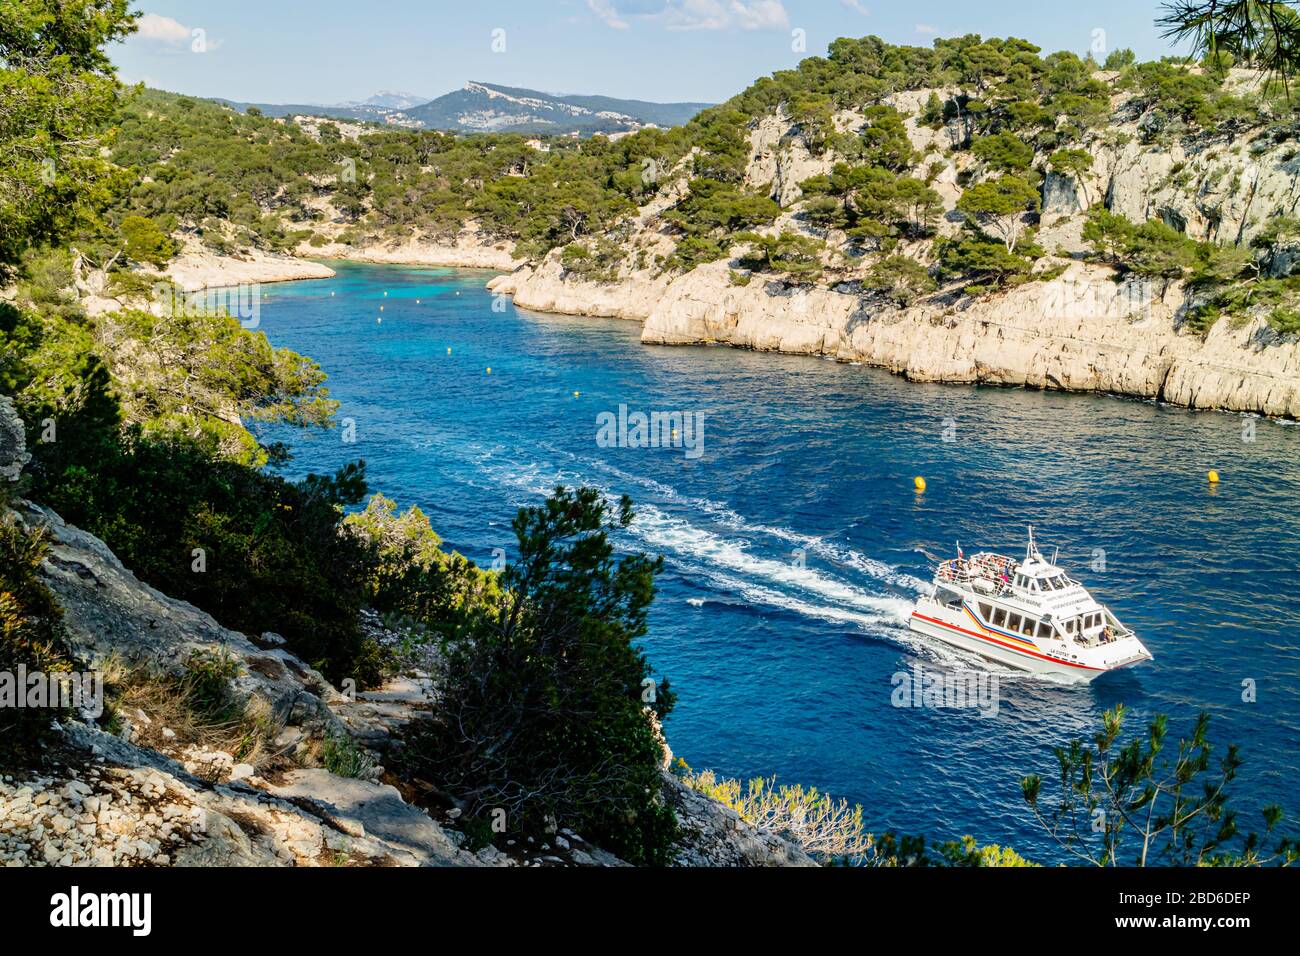 View over the Calanque de Port Pin with a sightseeing boat trip, Calanques National Park, near Cassis, south coast of France. Spring 2017. Stock Photo